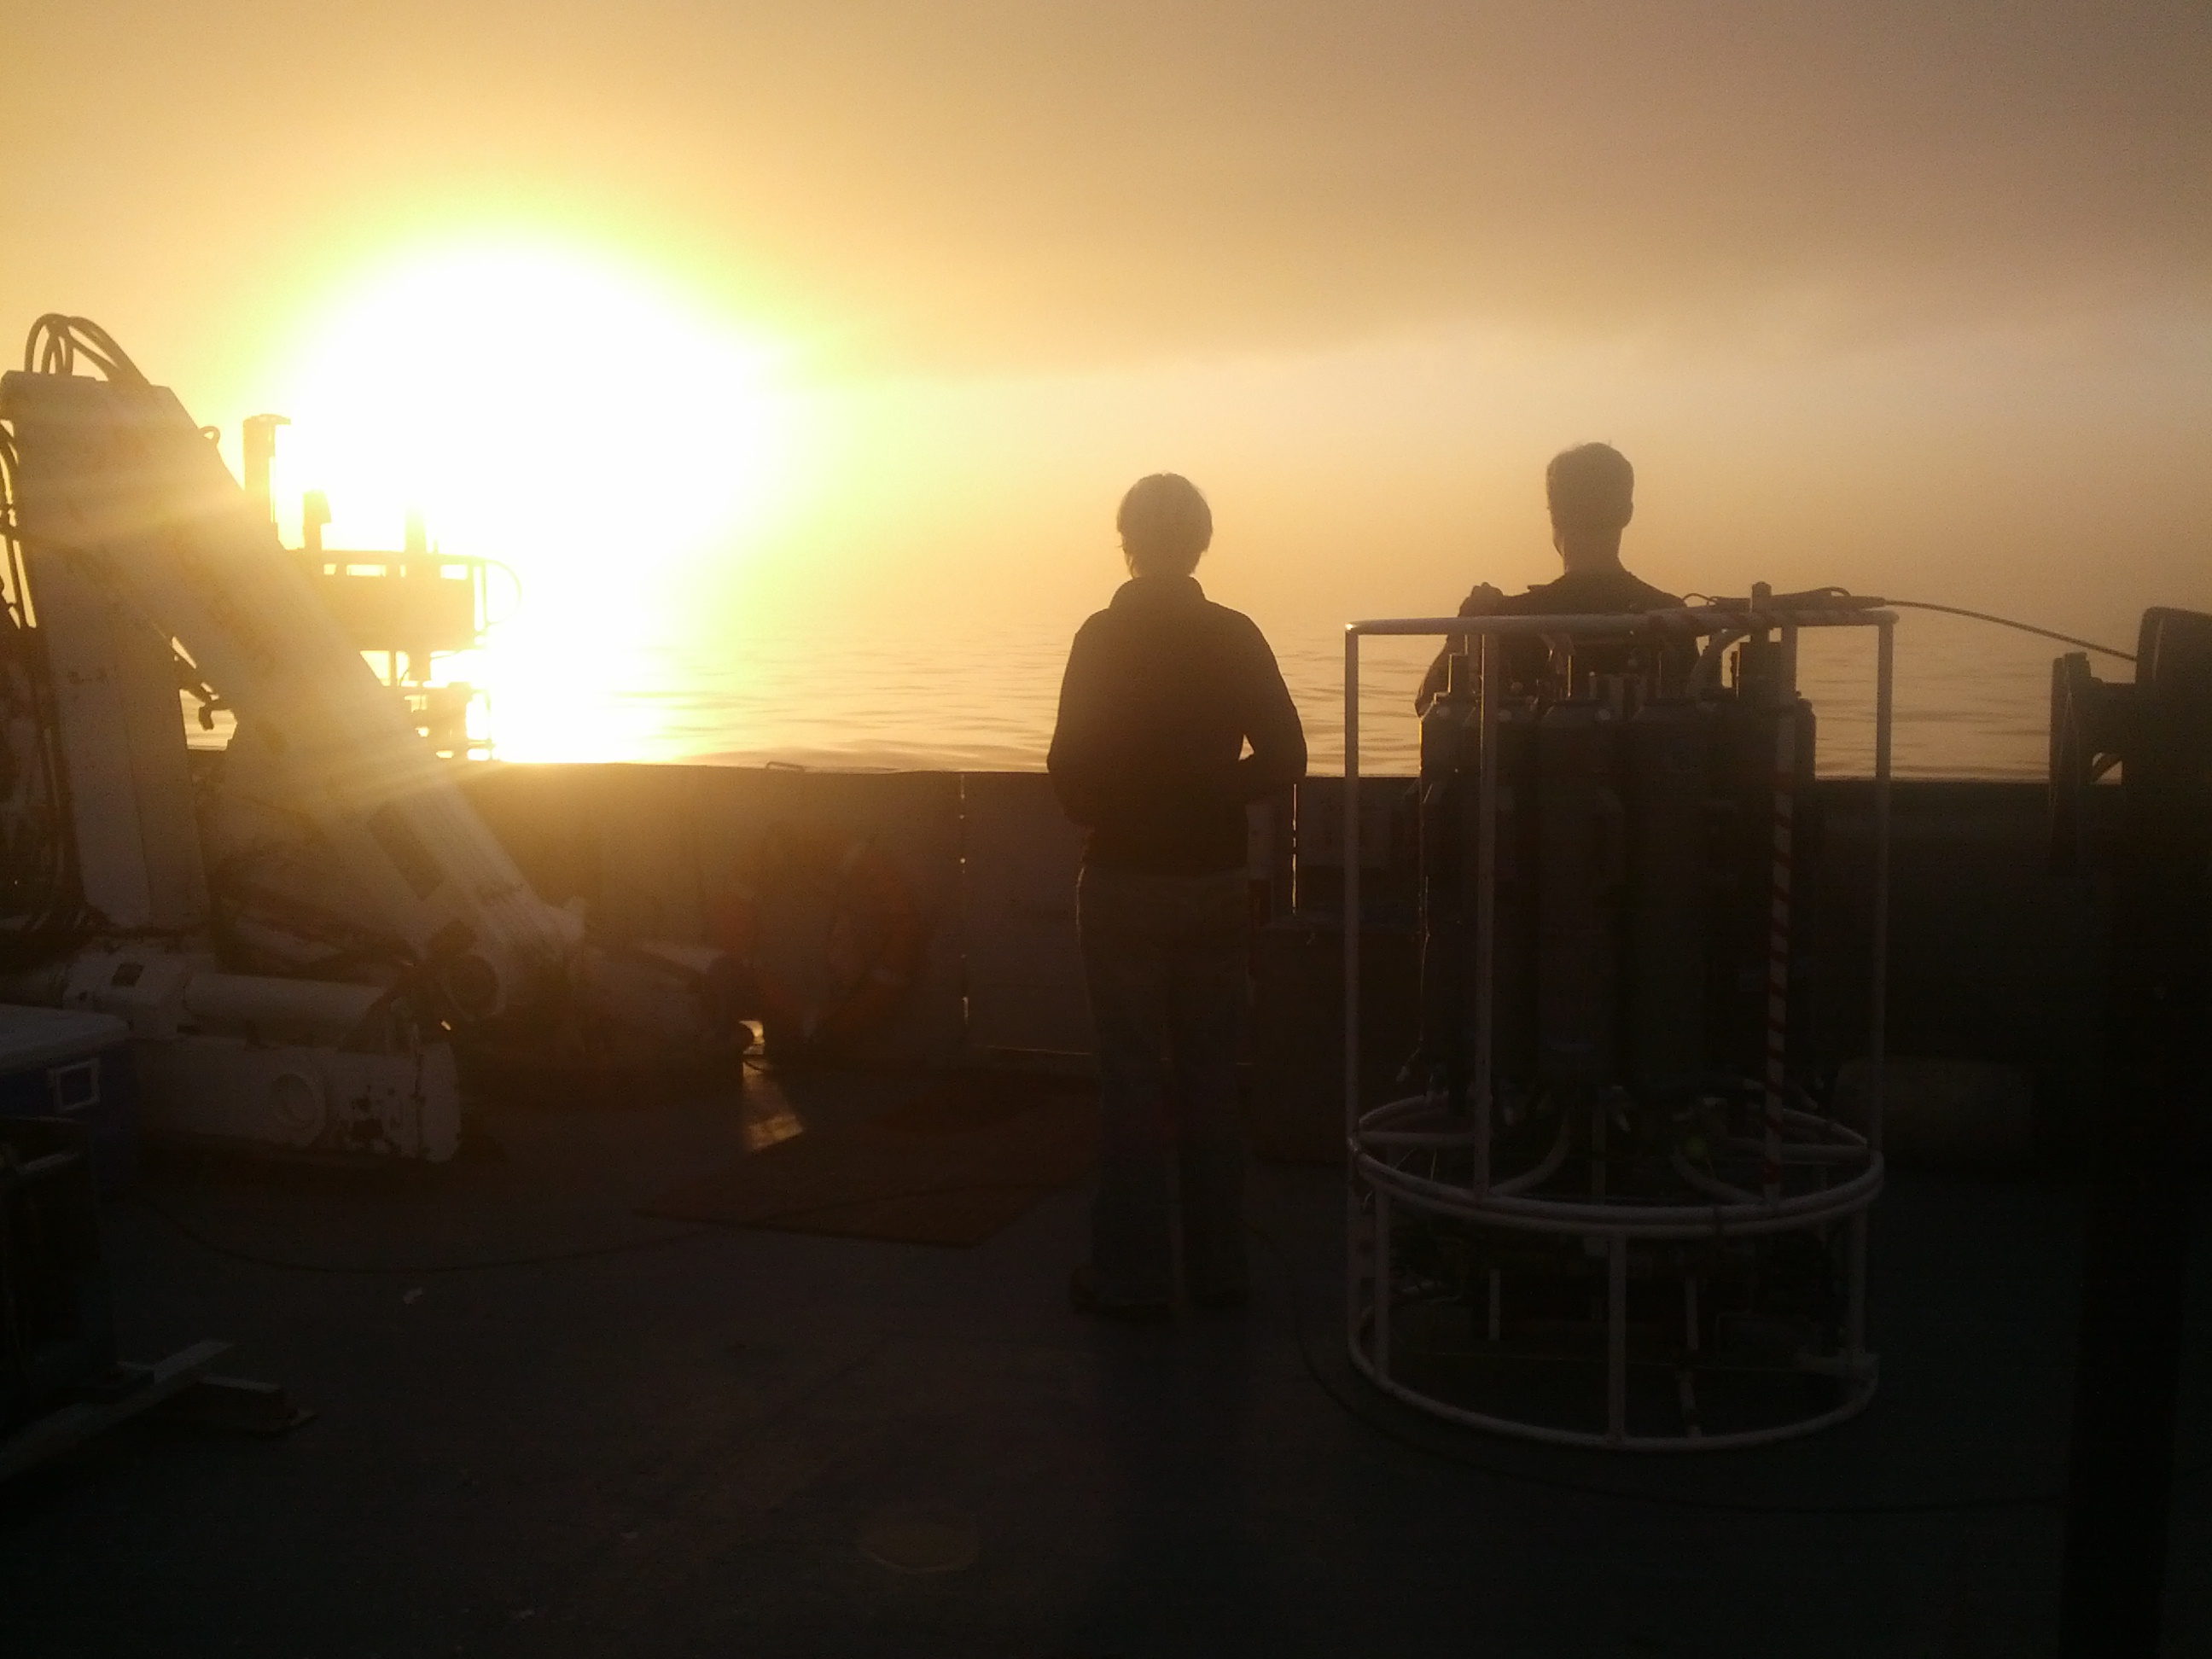 A sunset on Lake Superior from the R/V Blue Heron